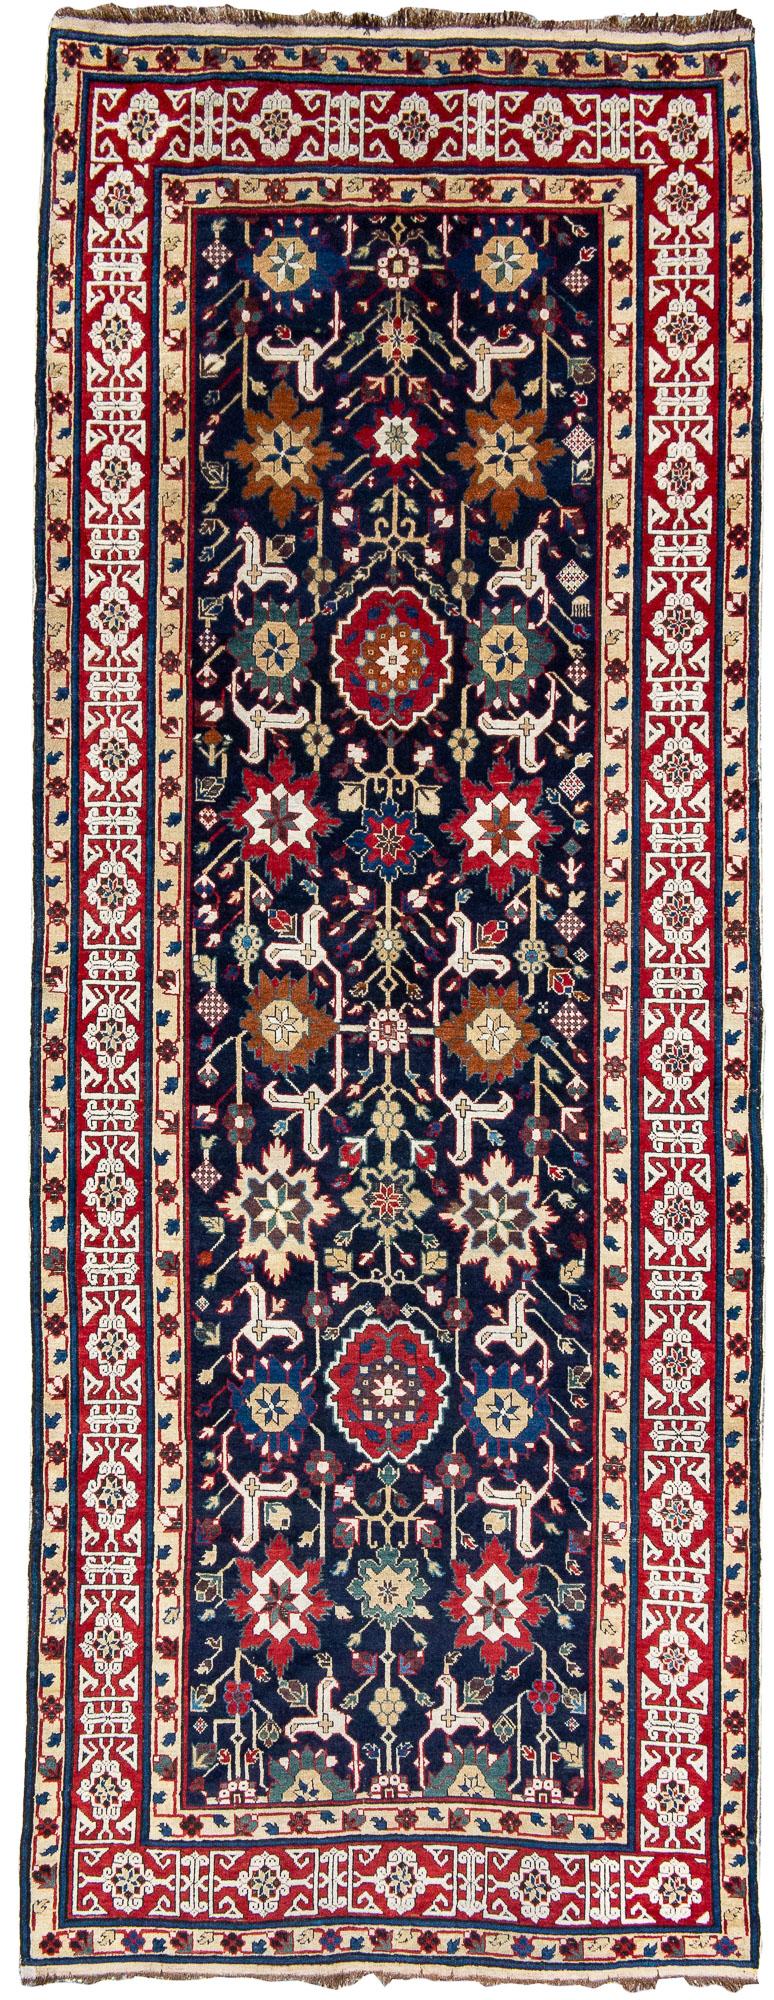 Woven in the east Caucasus near the Caspian coast, this Shirvan long rug uses perfect scale of drawing accentuated by vibrant saturated color. The field is composed of abstract floral ornament with a central column of varying rosettes flanked on